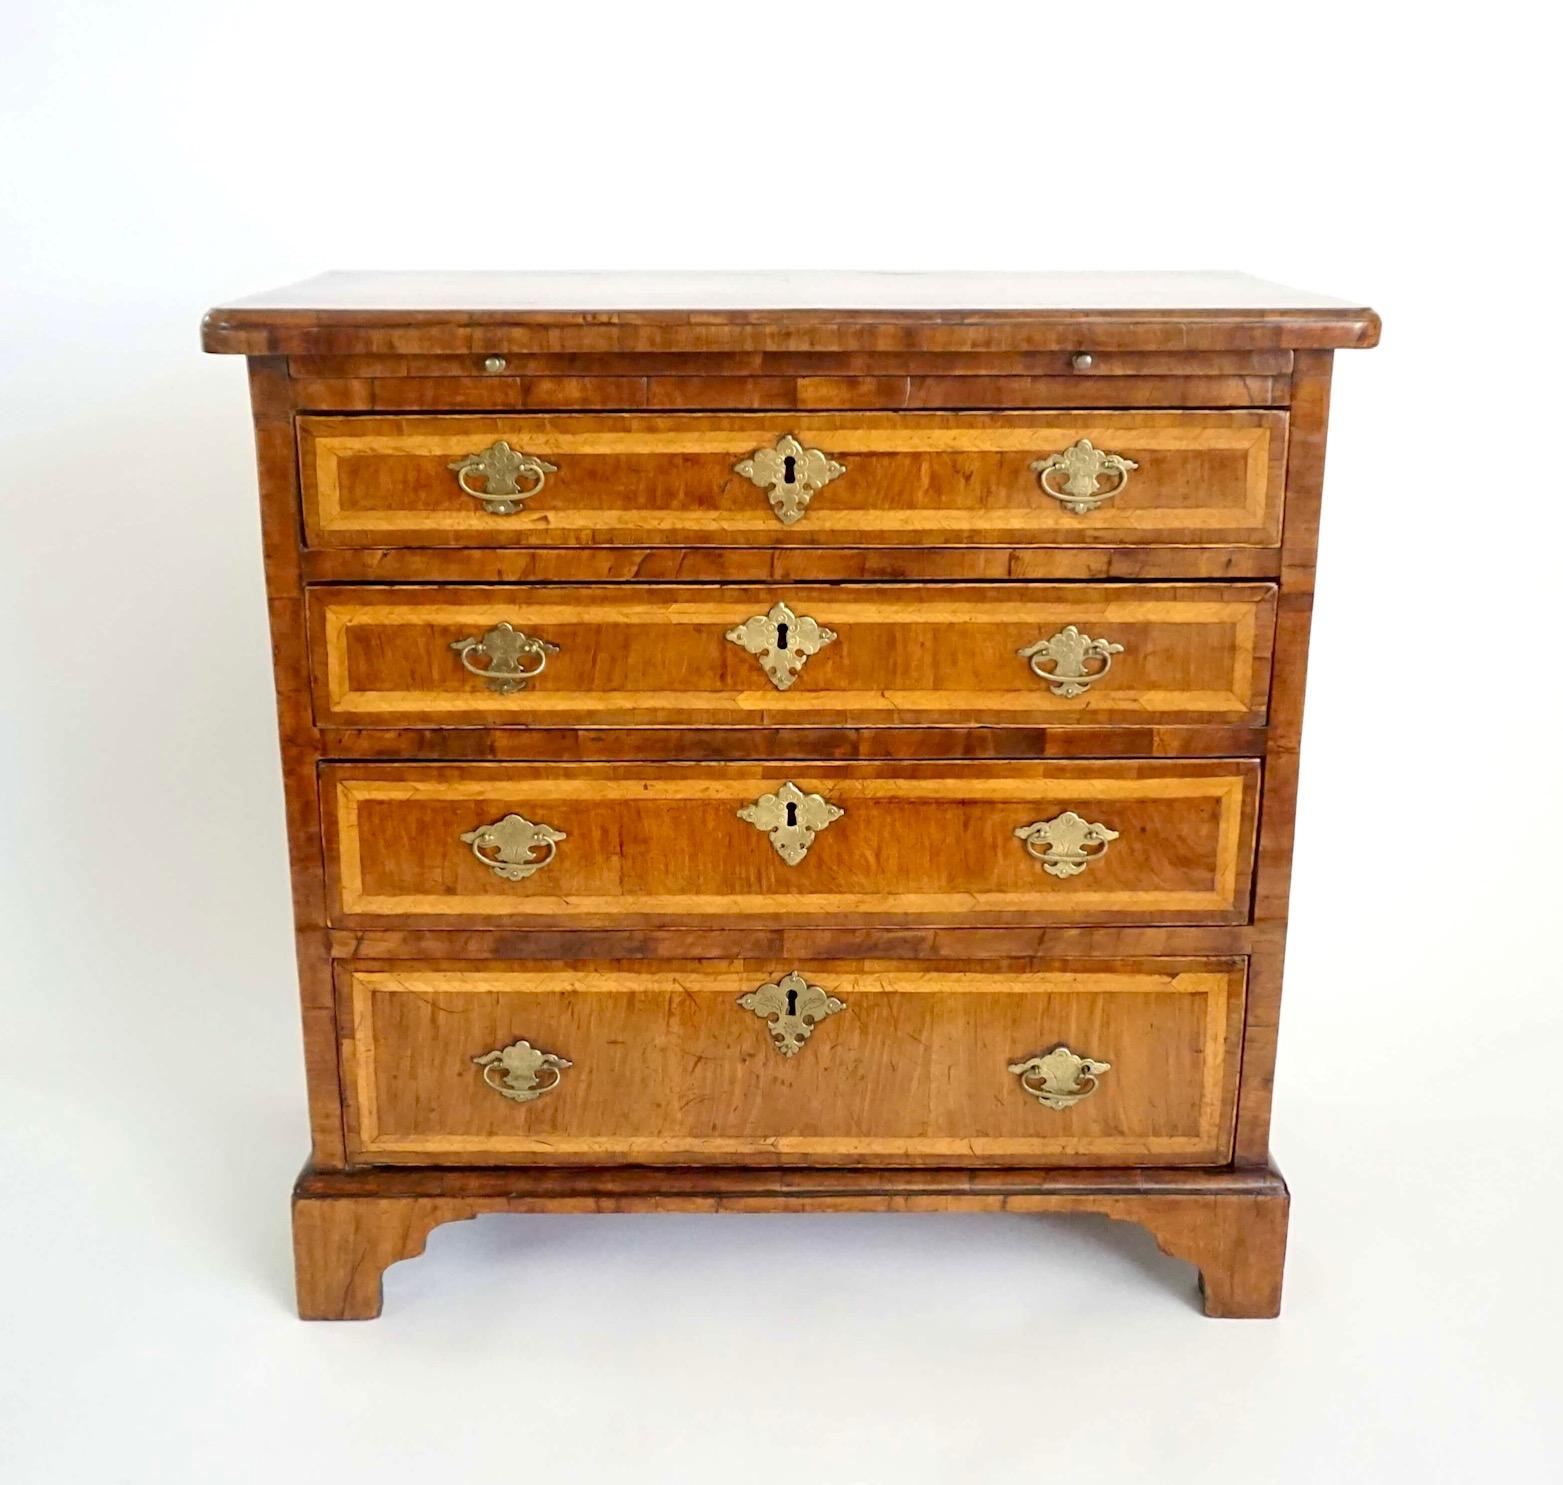 English Walnut and Satinwood Inlaid Petite Chest or Bachelor's Chest, circa 1715 For Sale 5